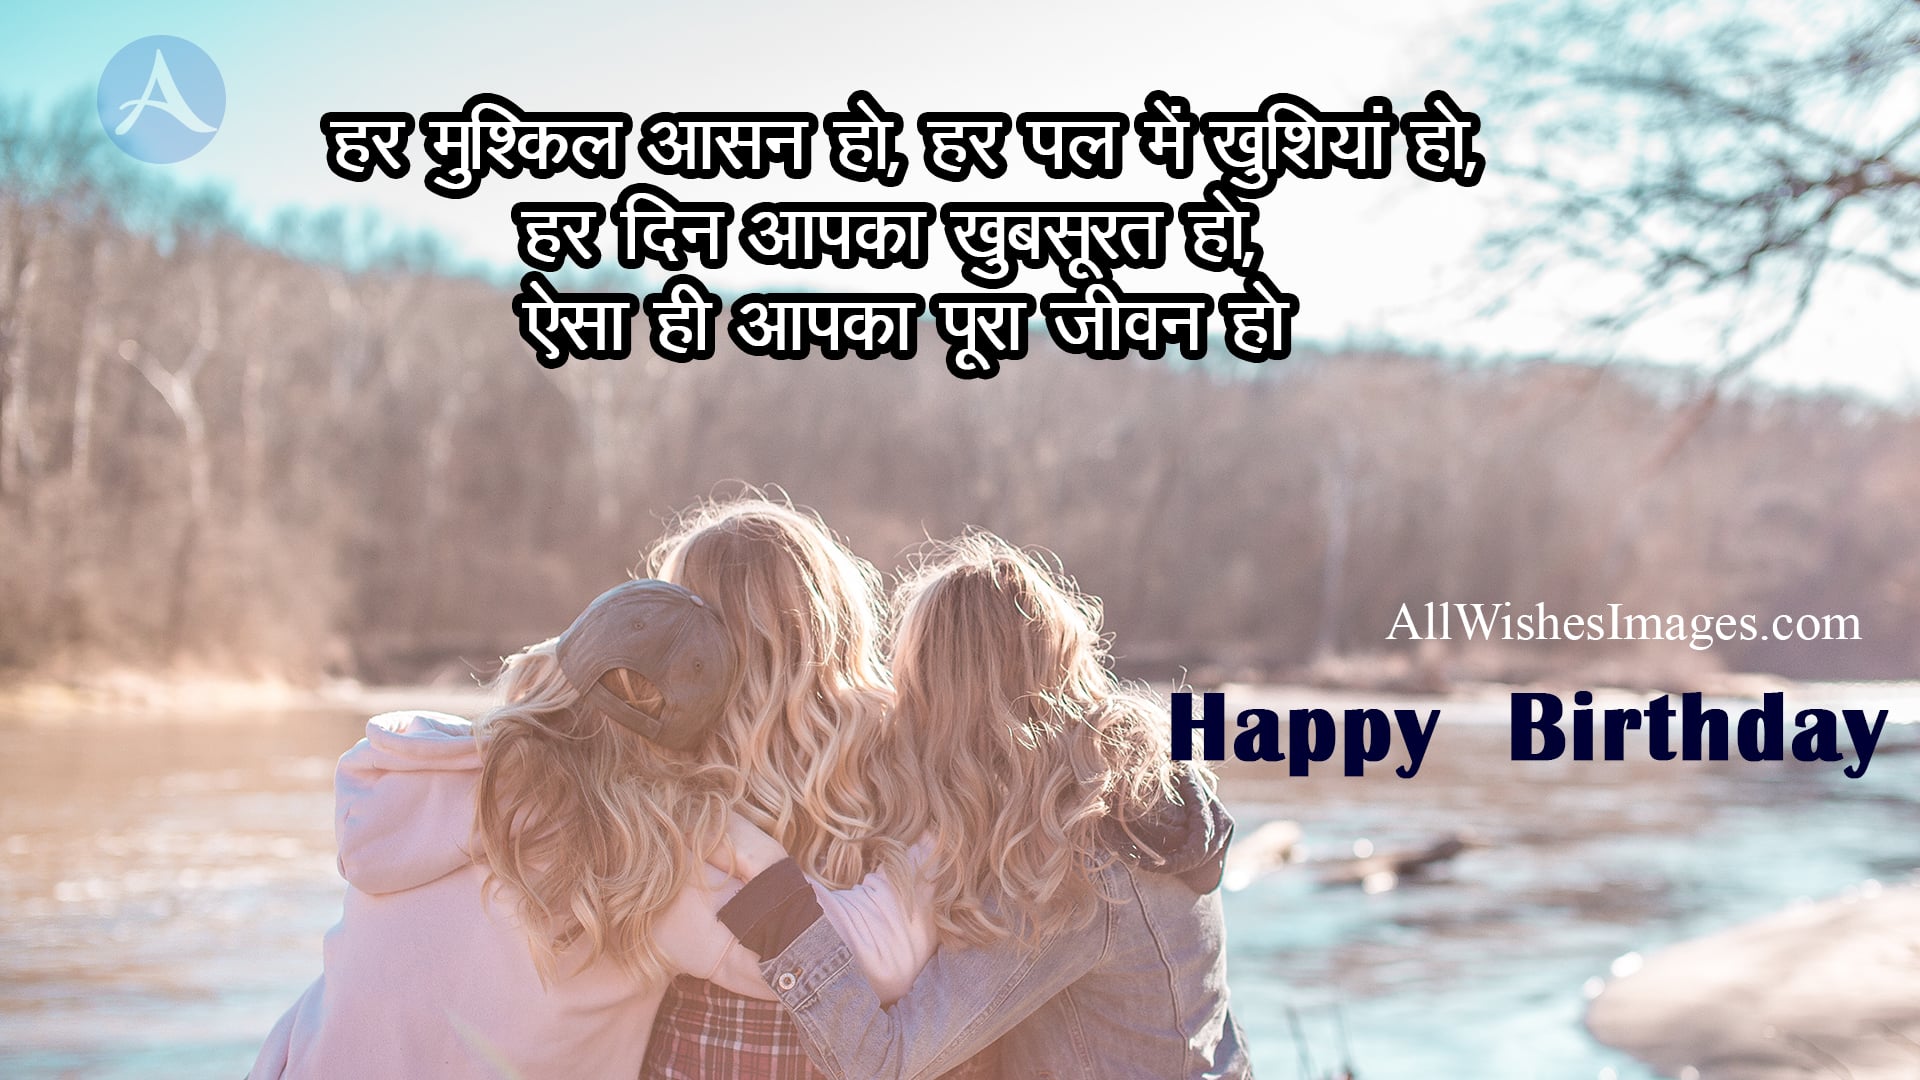 Happy Birthday Shayari Image Hd - All Wishes Images - Images for WhatsApp